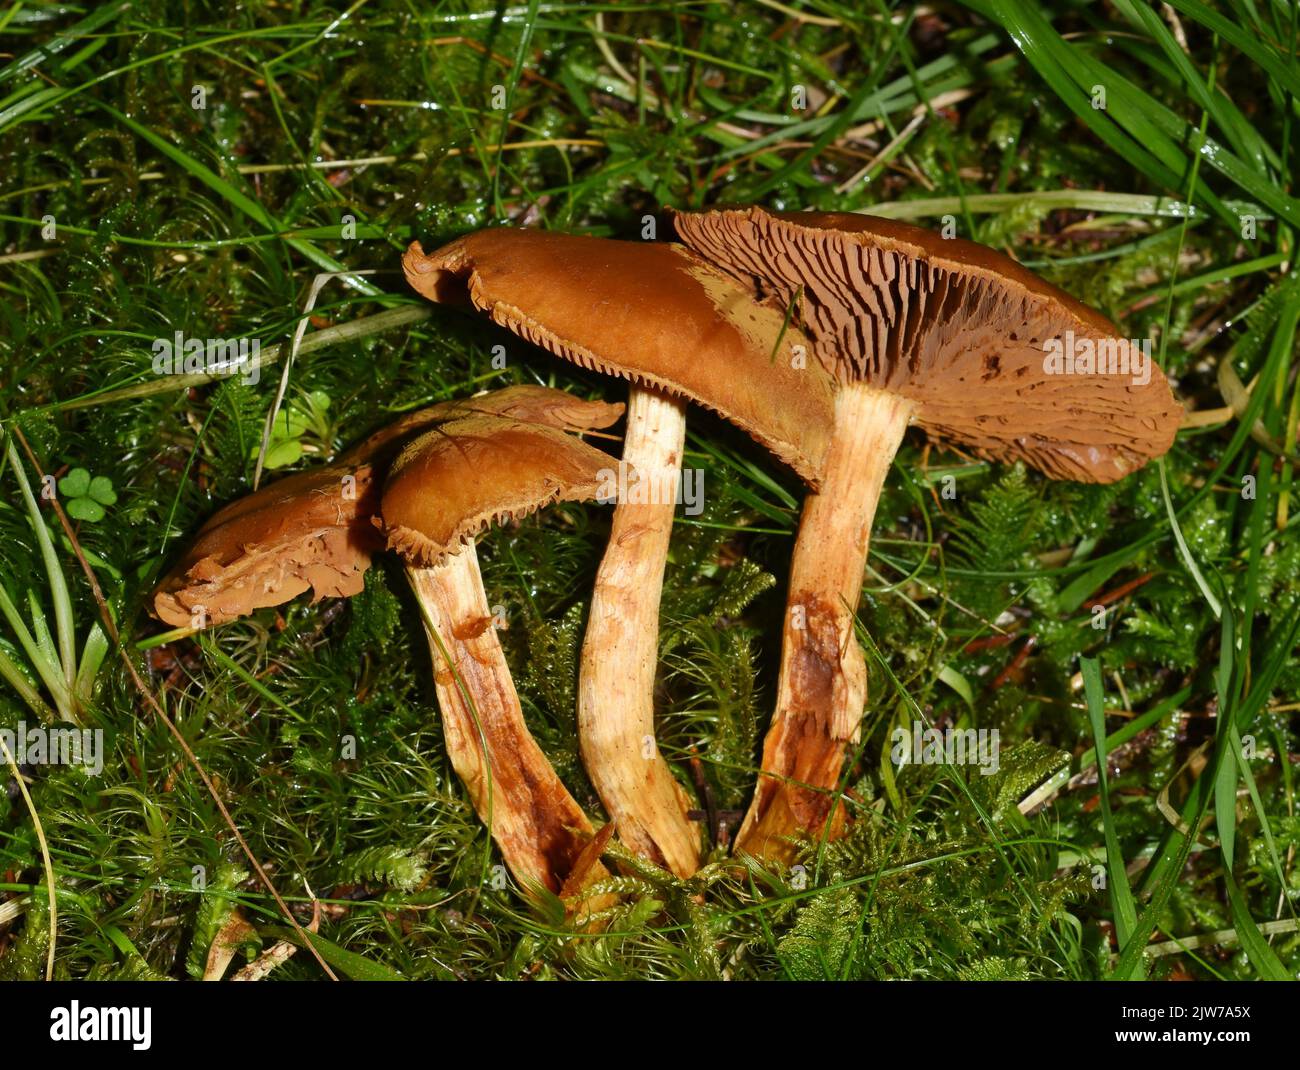 The higly toxic deadly webcap Cortinarius rubellus in a forest Stock Photo